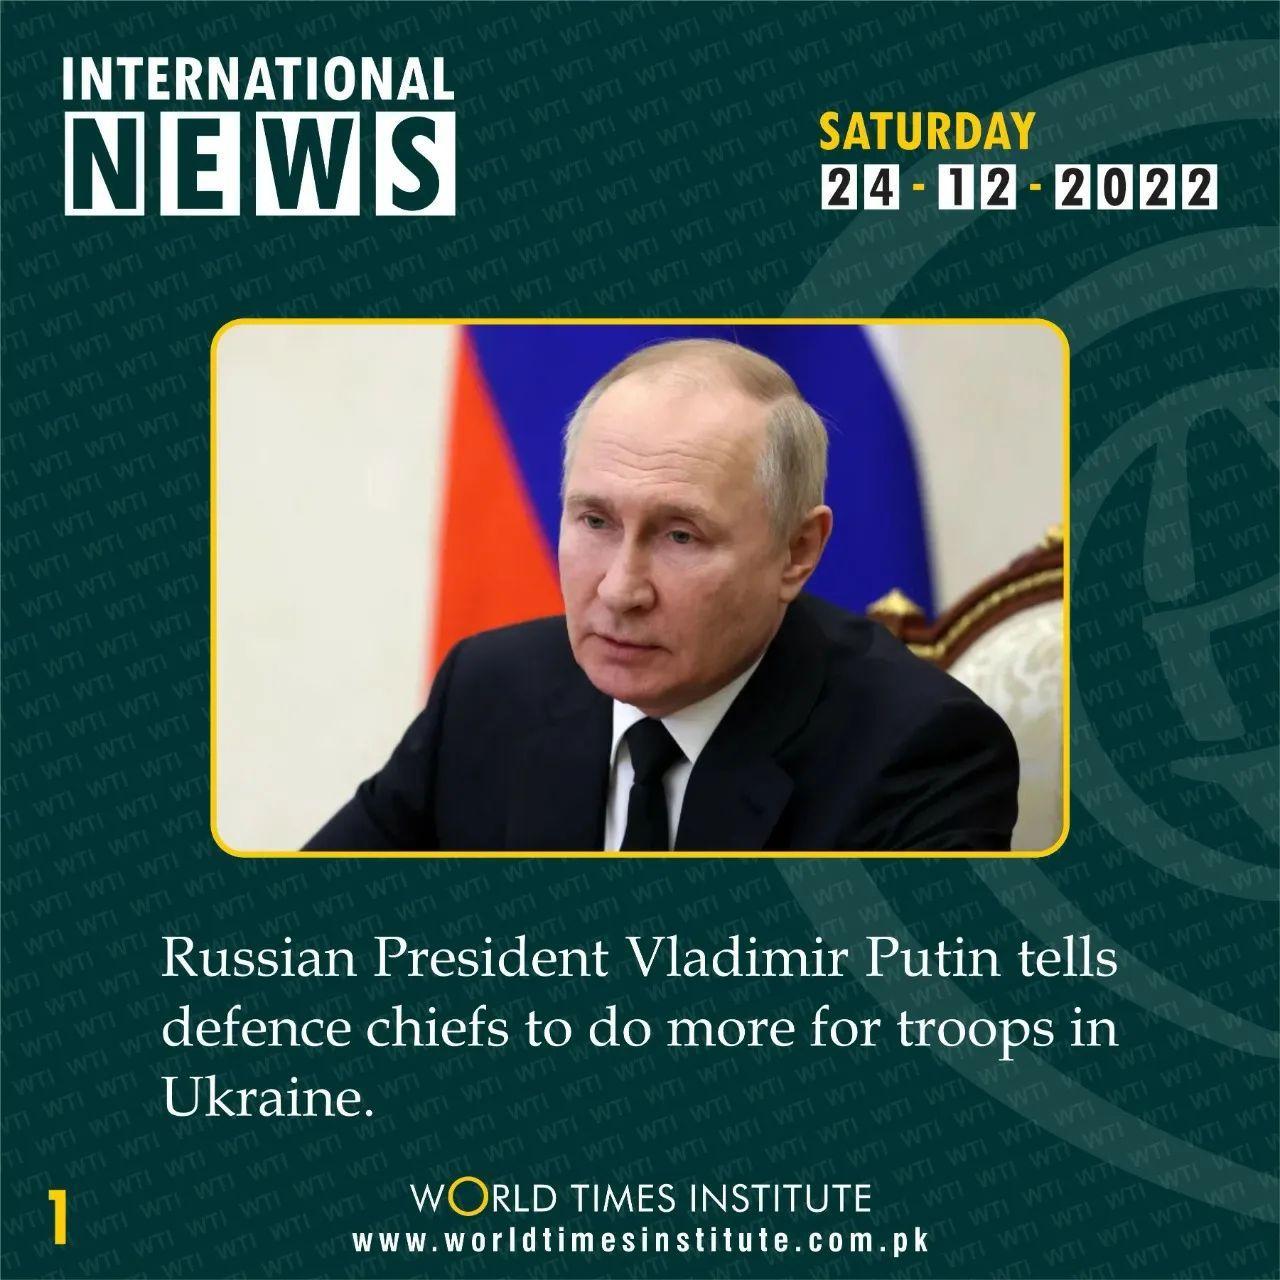 Read more about the article International News of the Day. 24-12-2022